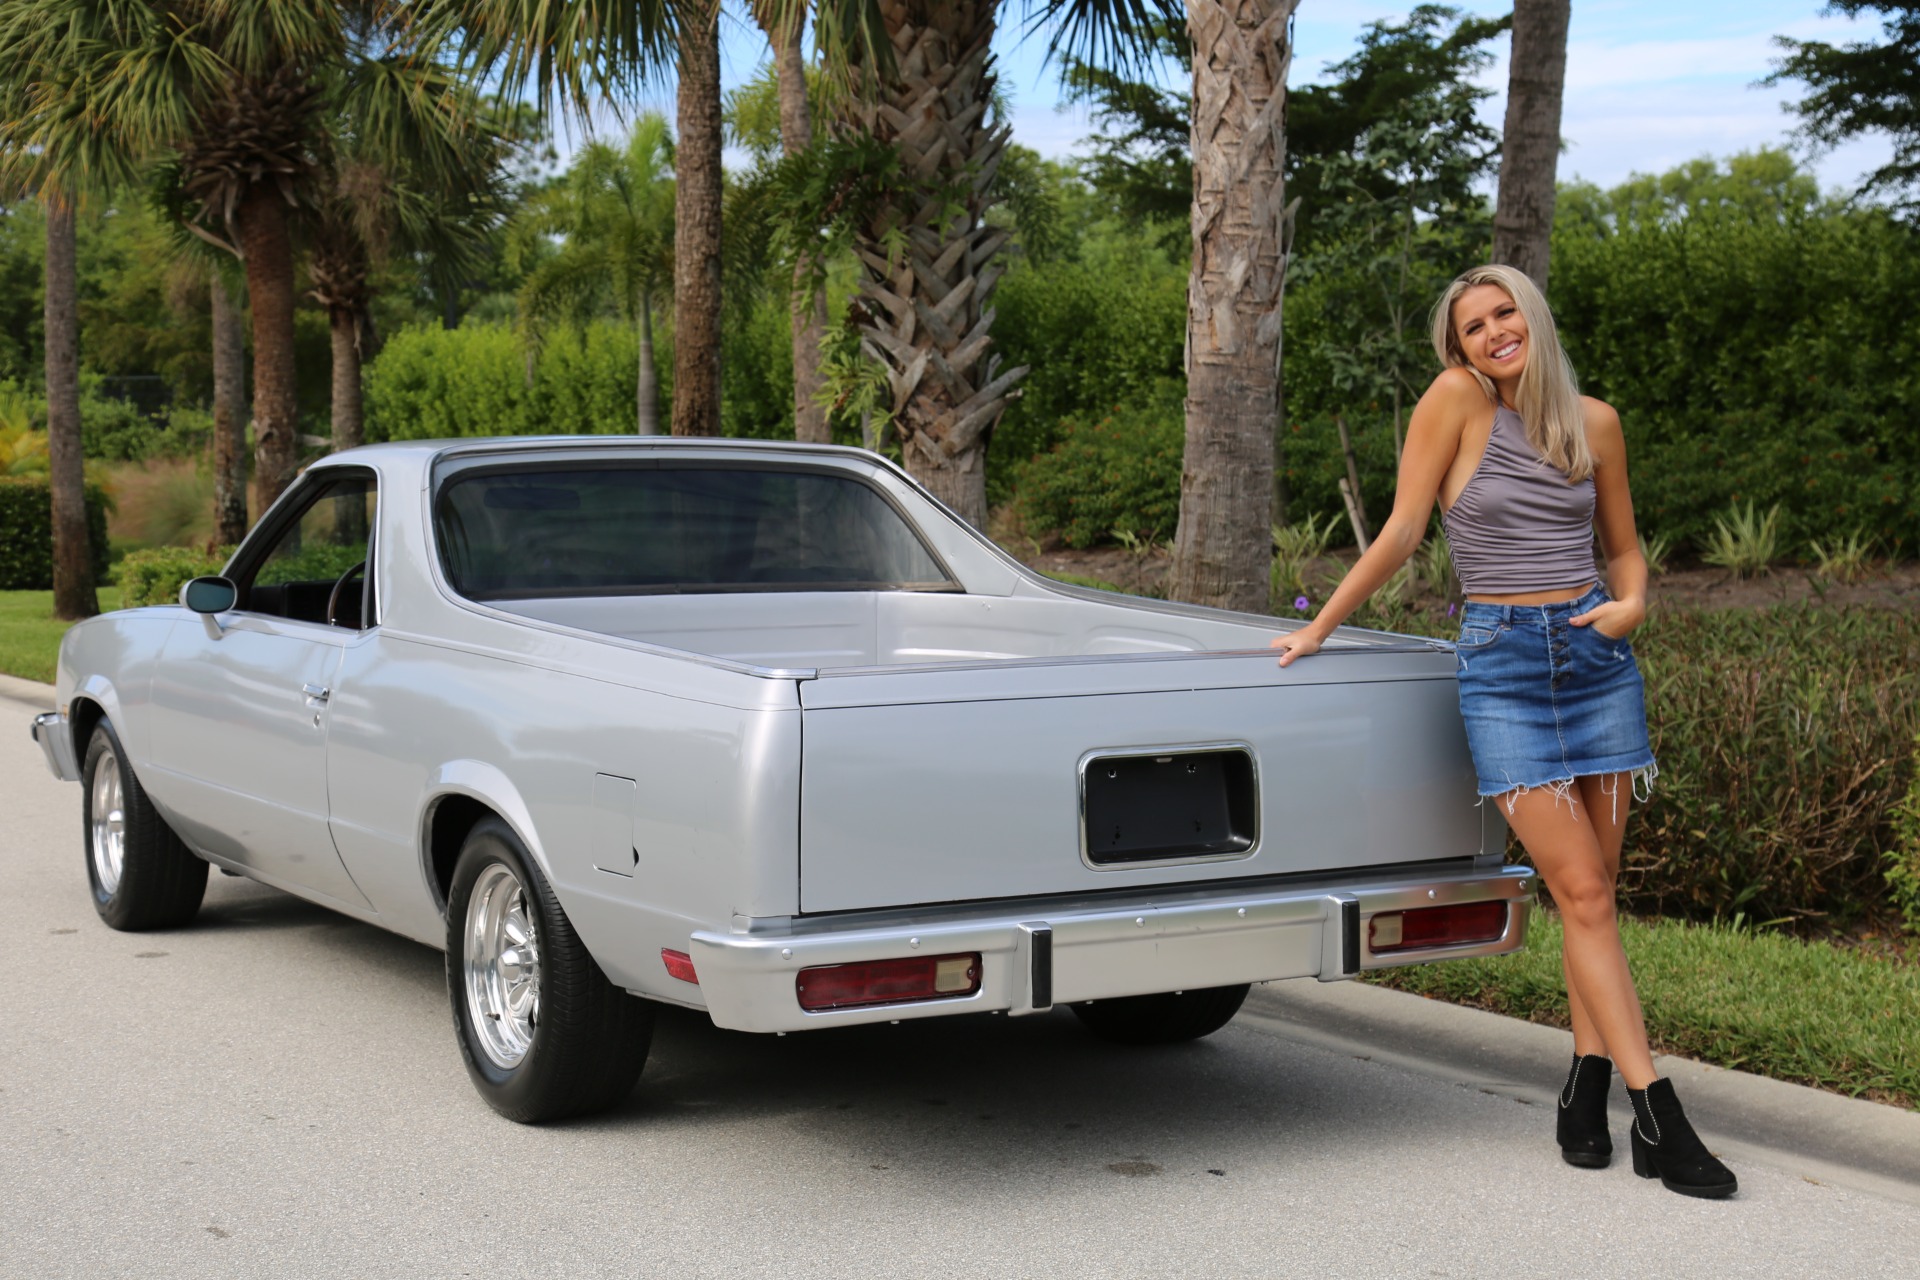 Used 1985 Chevrolet El Camino ss V8 Auto SS for sale Sold at Muscle Cars for Sale Inc. in Fort Myers FL 33912 4